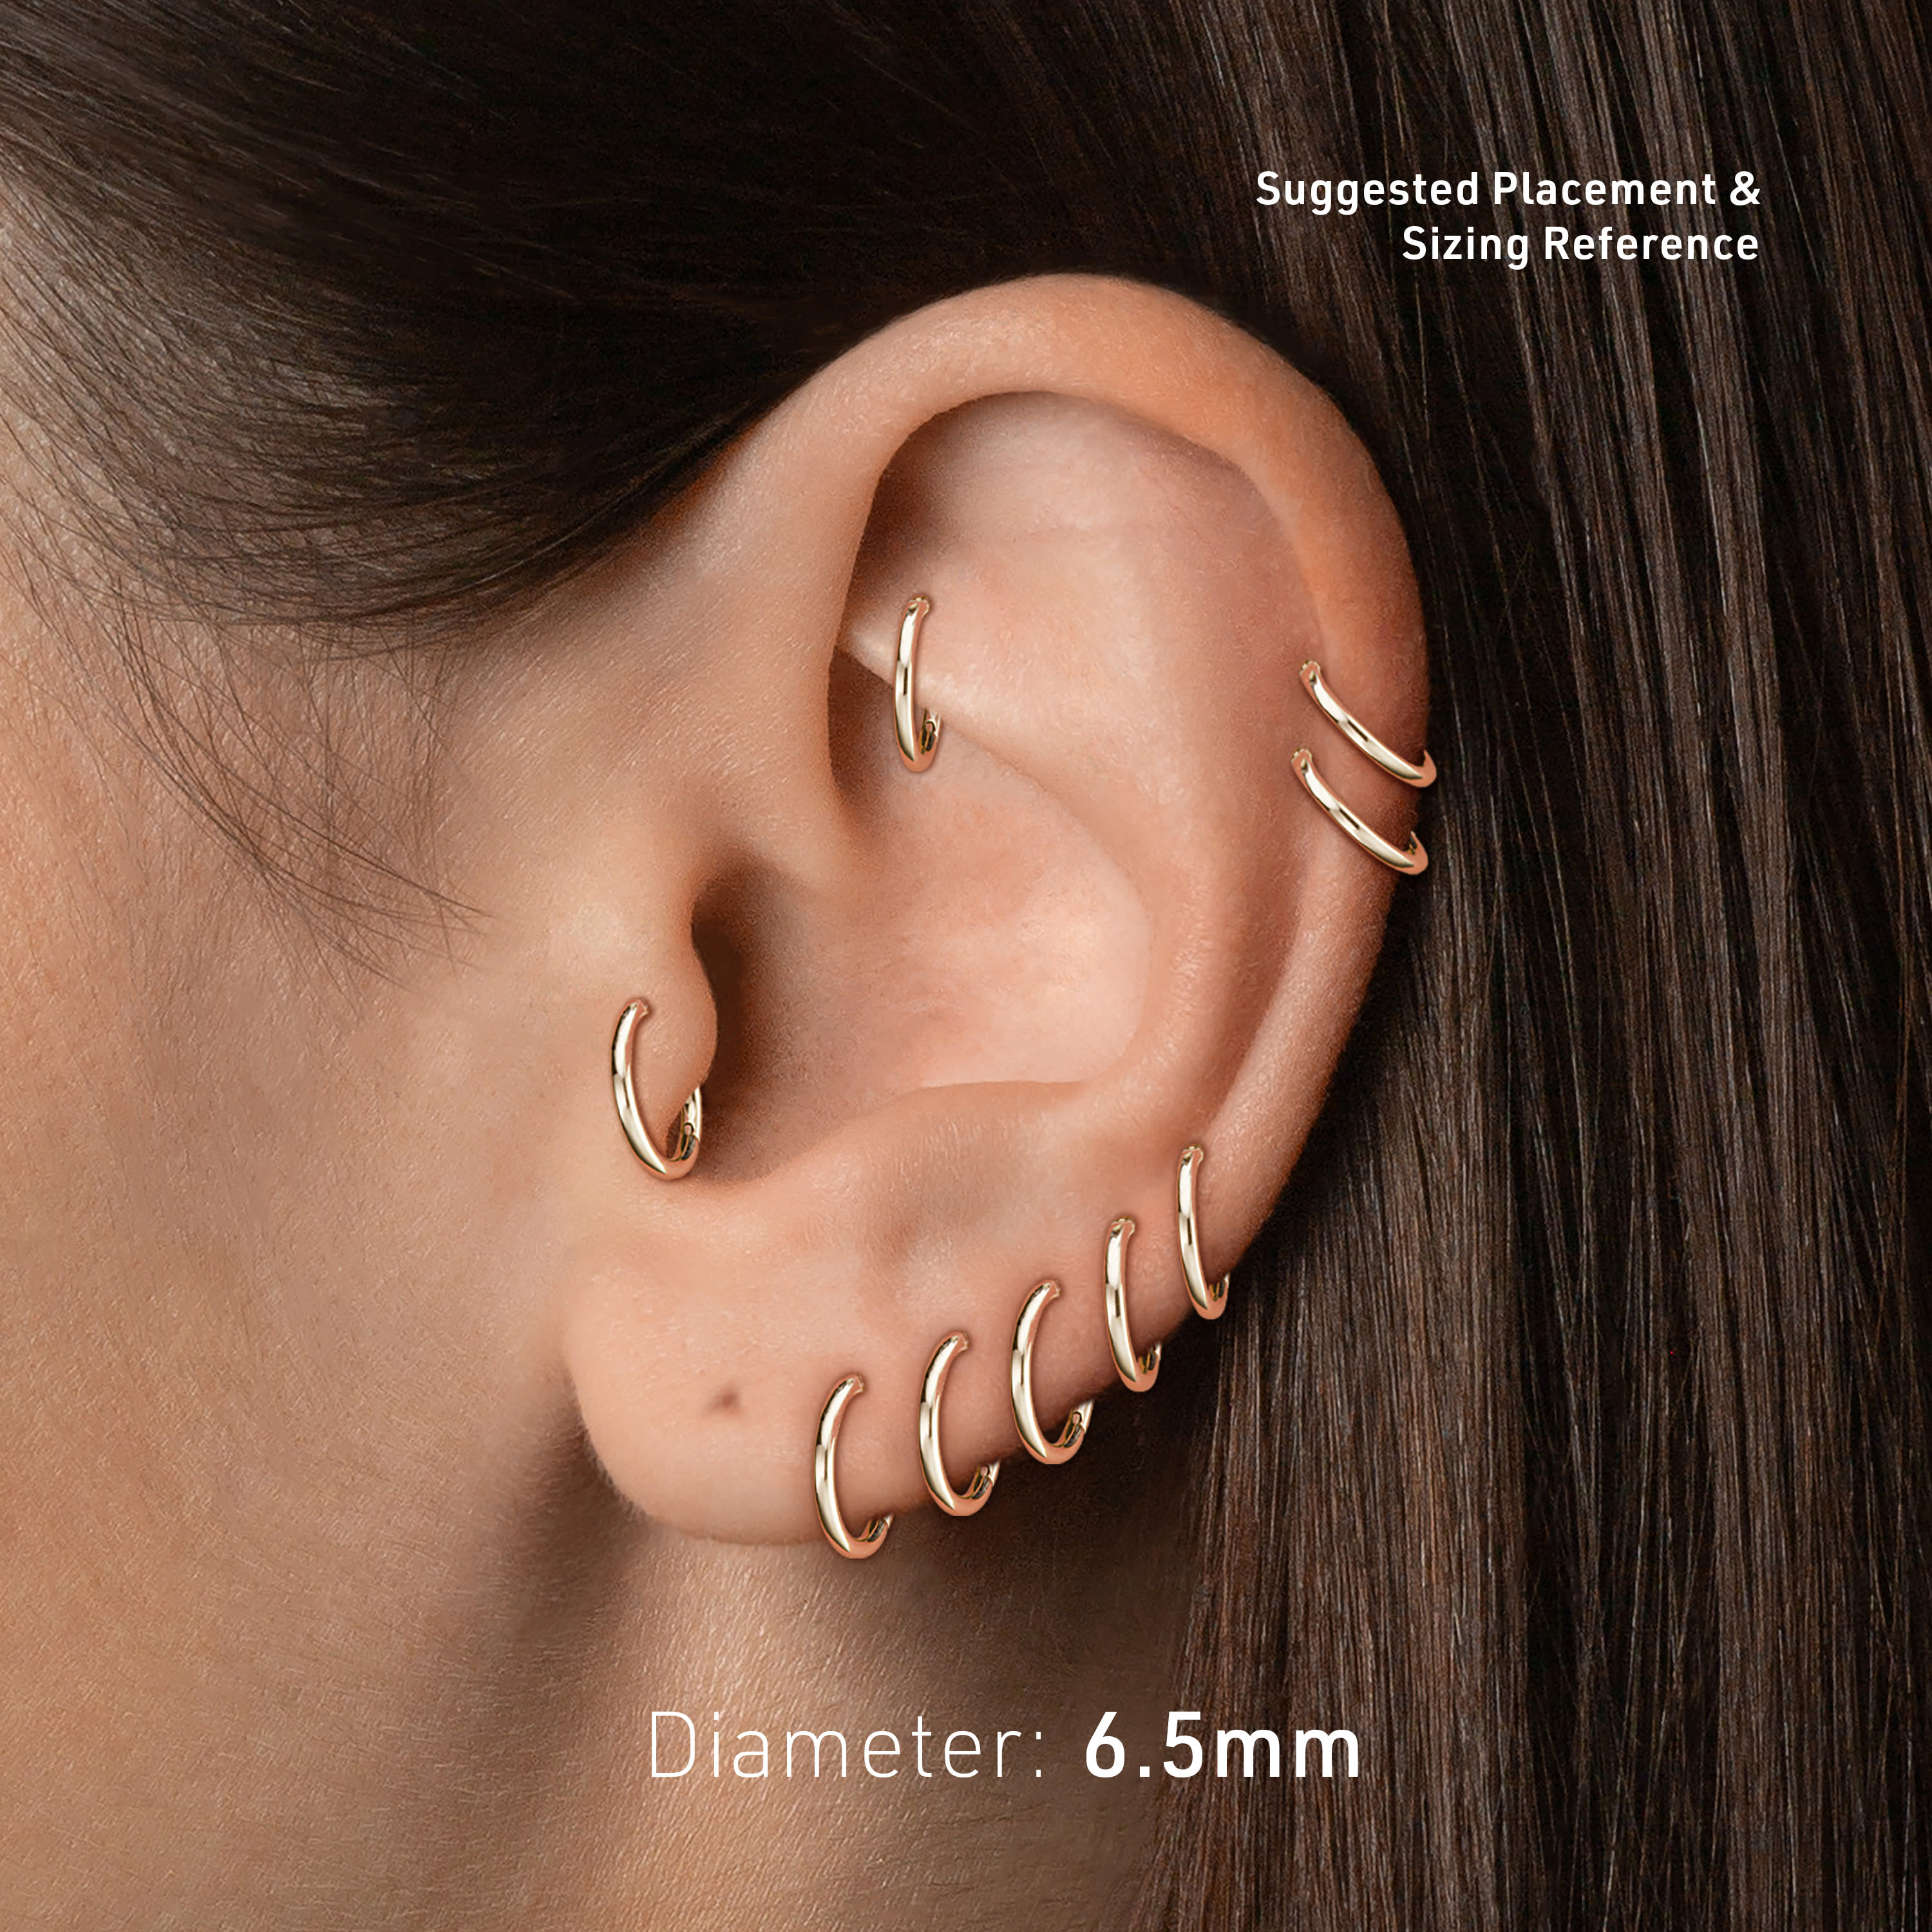 Suggested earlobe or cartilage placement for 6.5mm hoop earring size guide